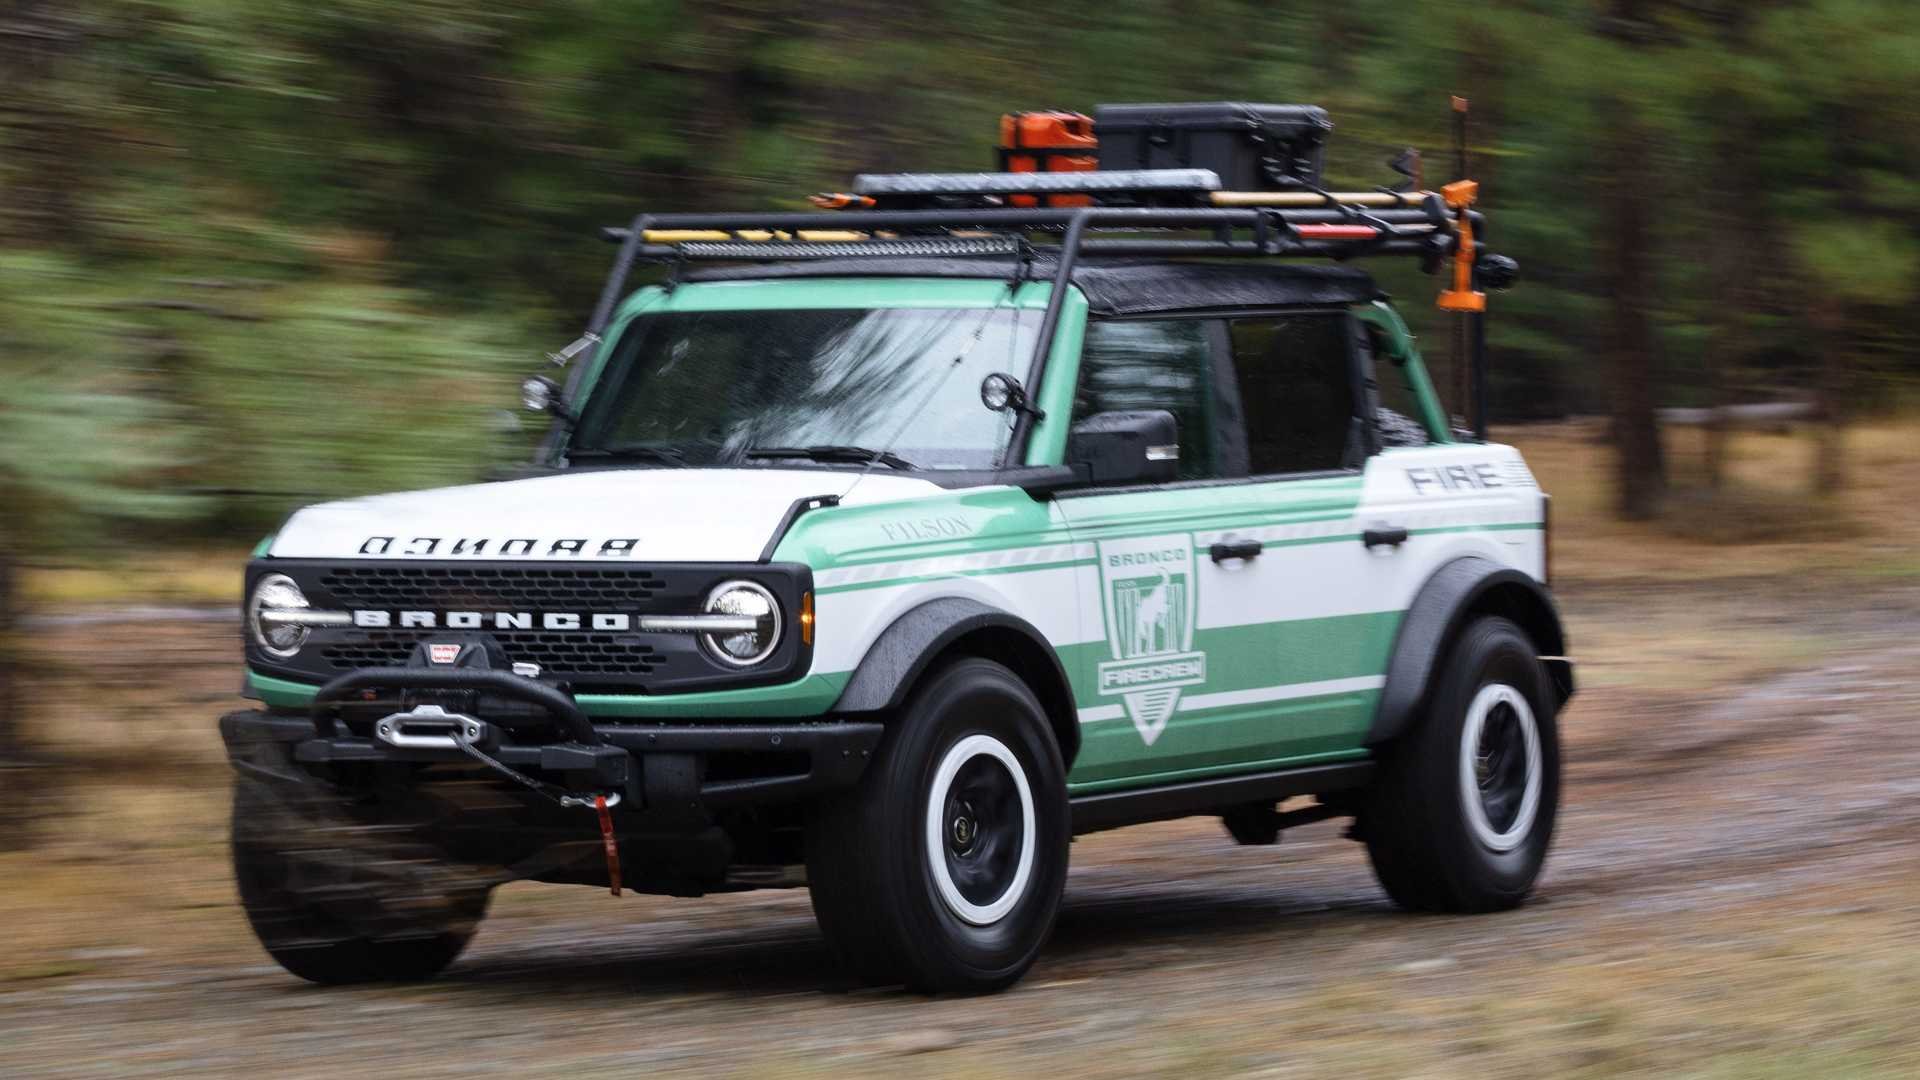 Ford Bronco Wildland Fire Rig Revealed To Support The Forest Service